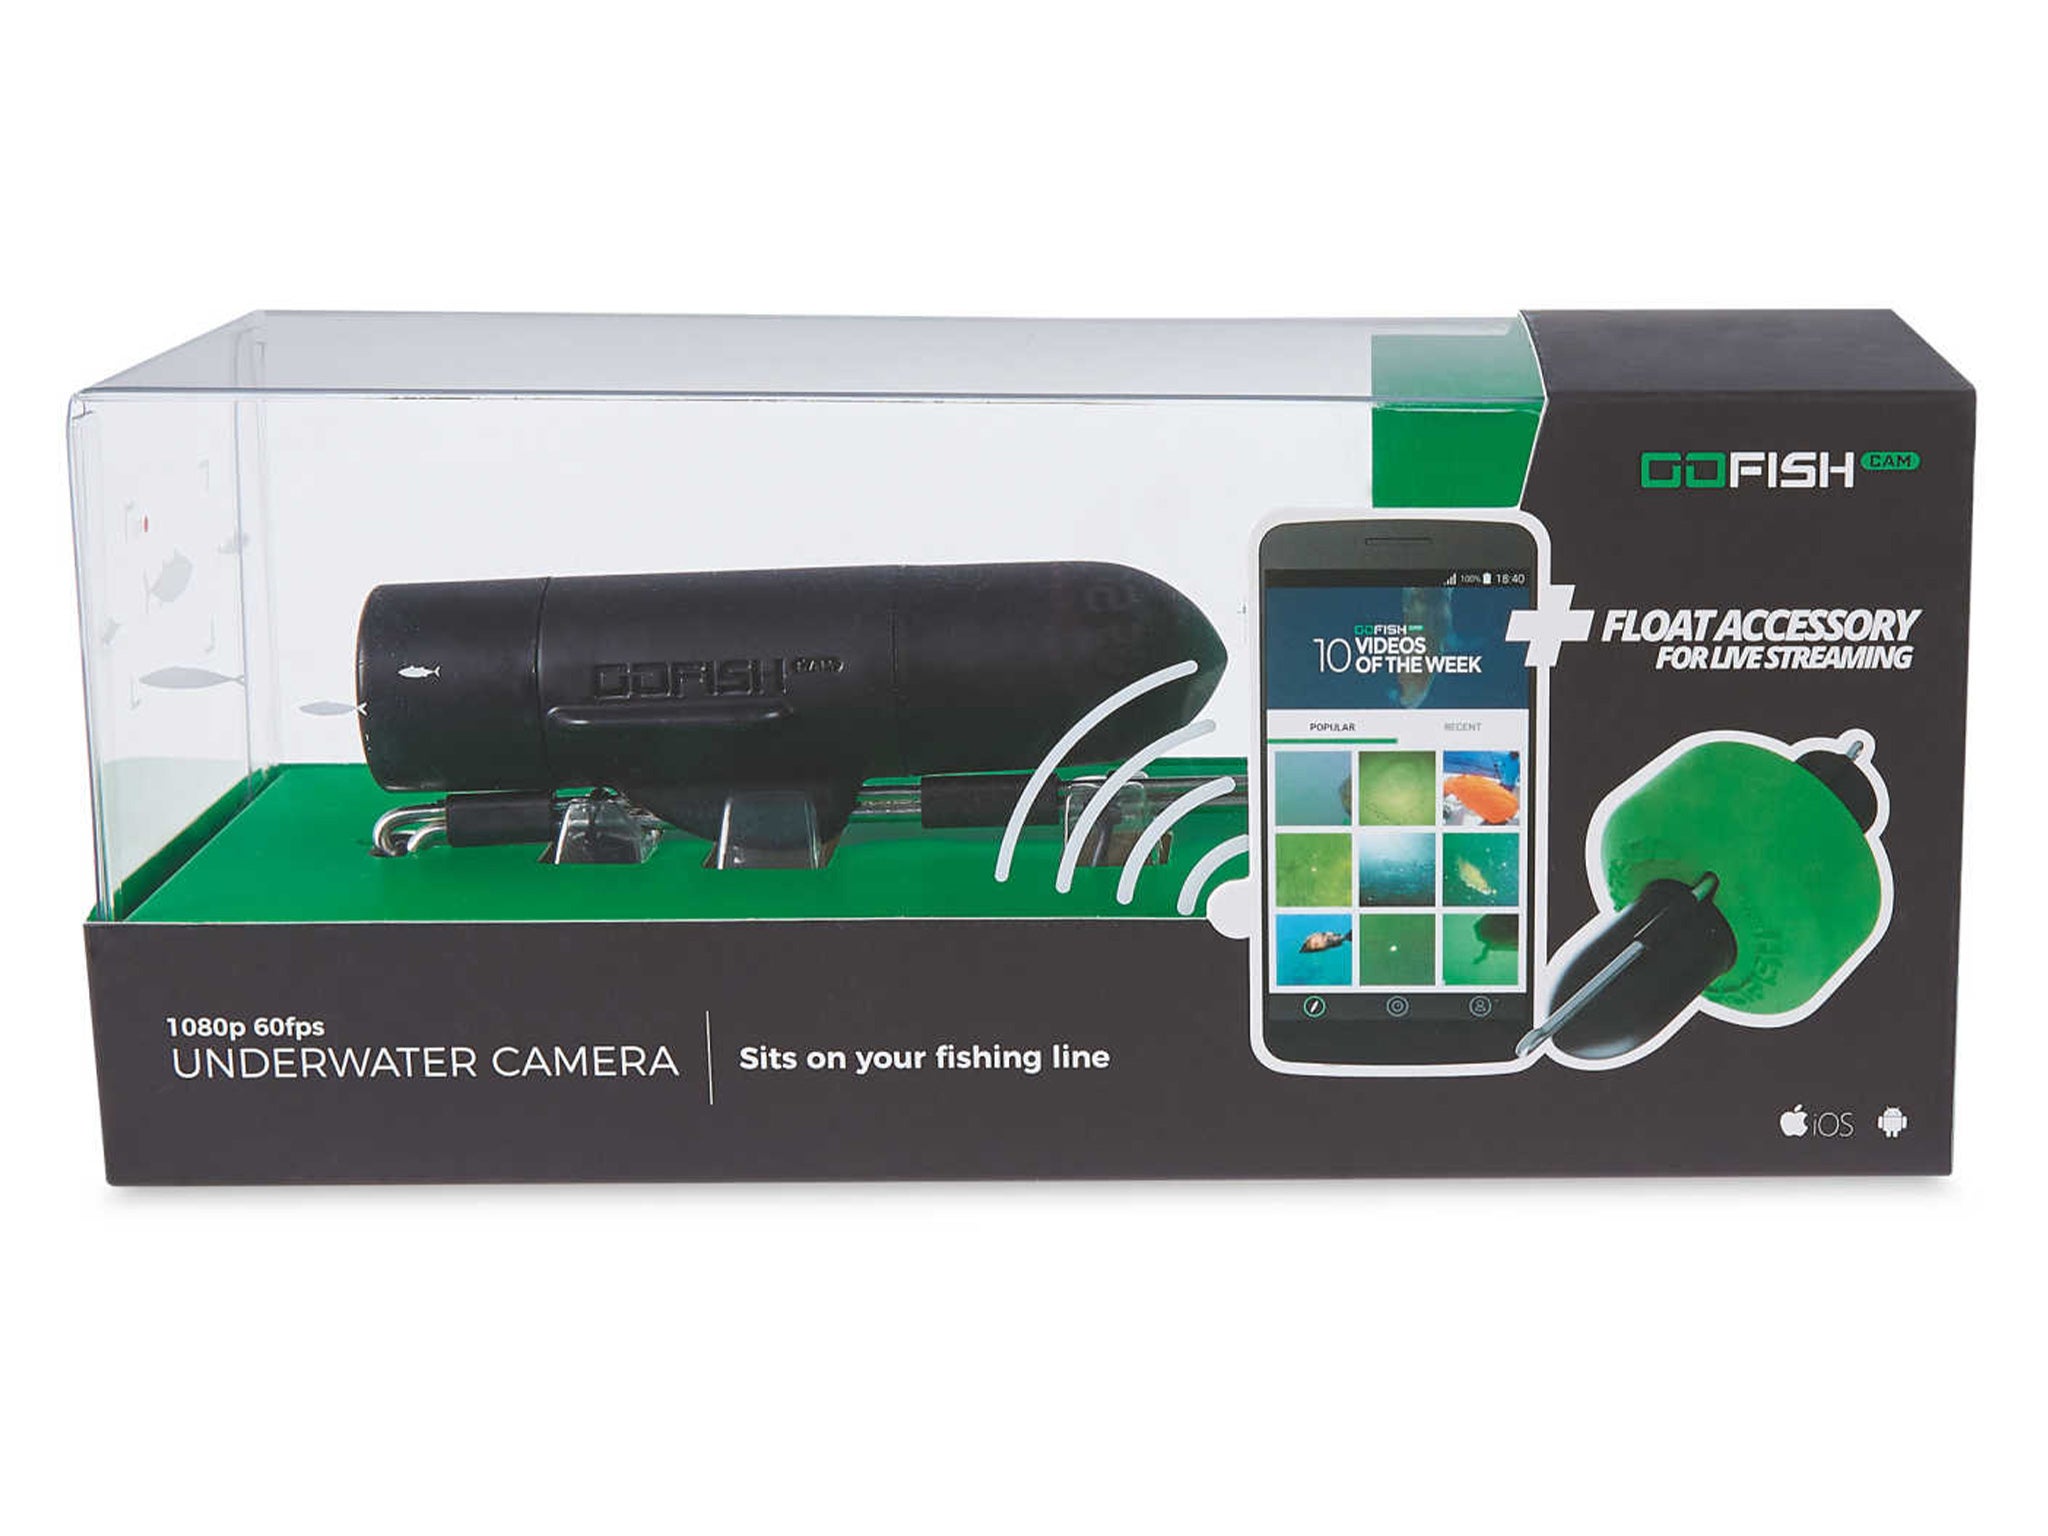 Aldi is now selling the GoFish underwater fishing camera